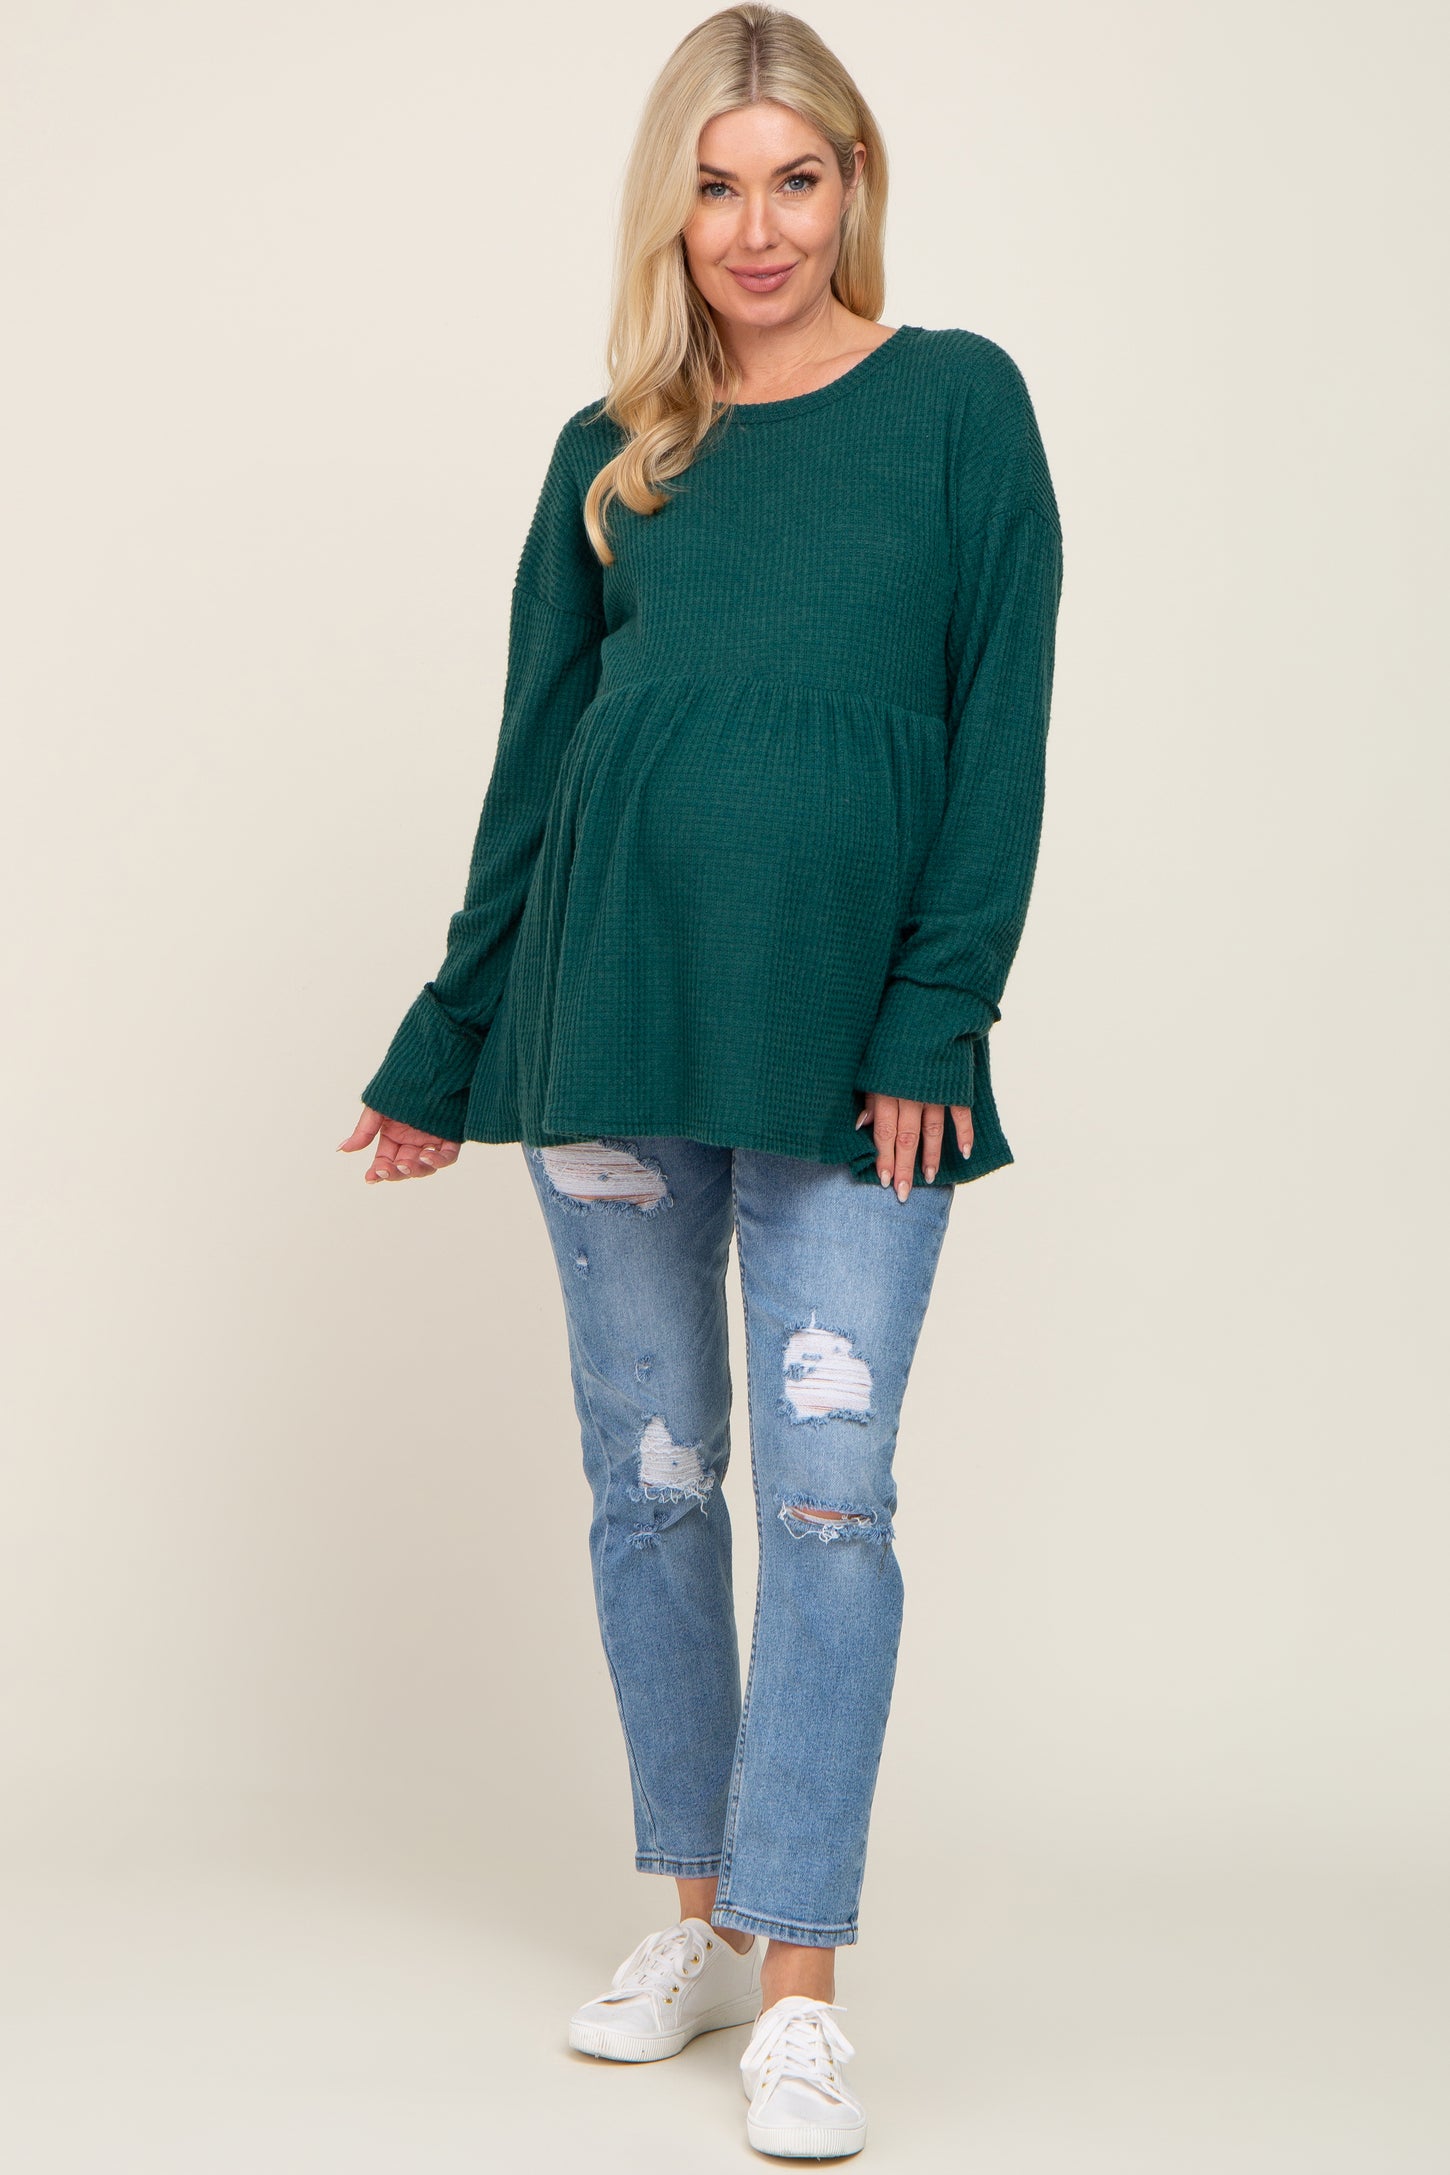 Forest Green Waffle Knit Long Sleeve Maternity Top